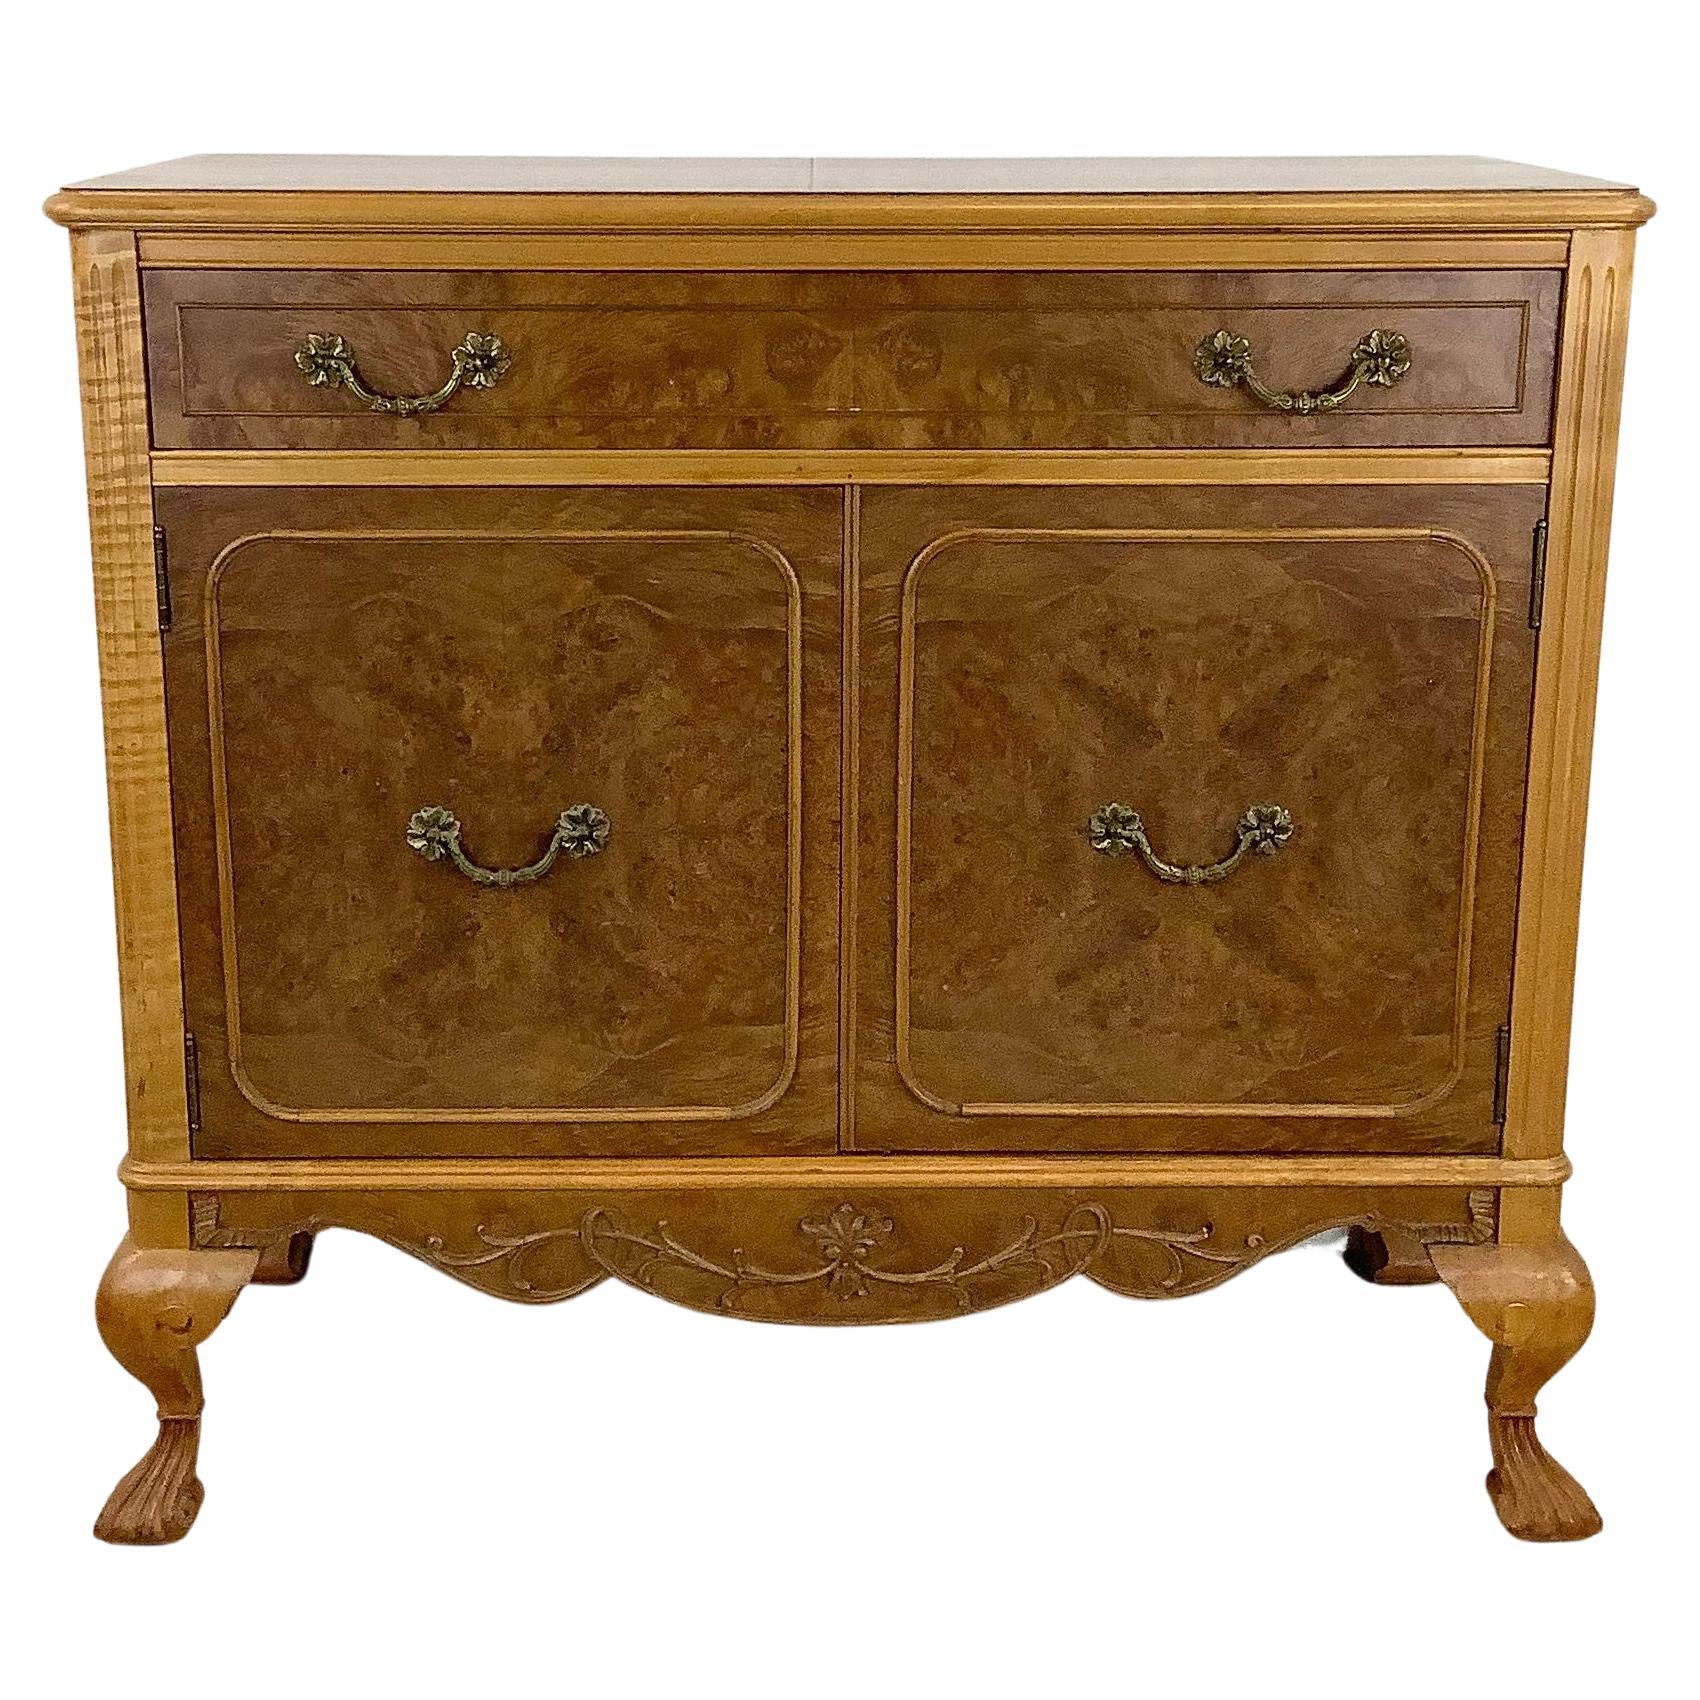 Vintage Burl Walnut Queen Anne Style Commode Cabinet